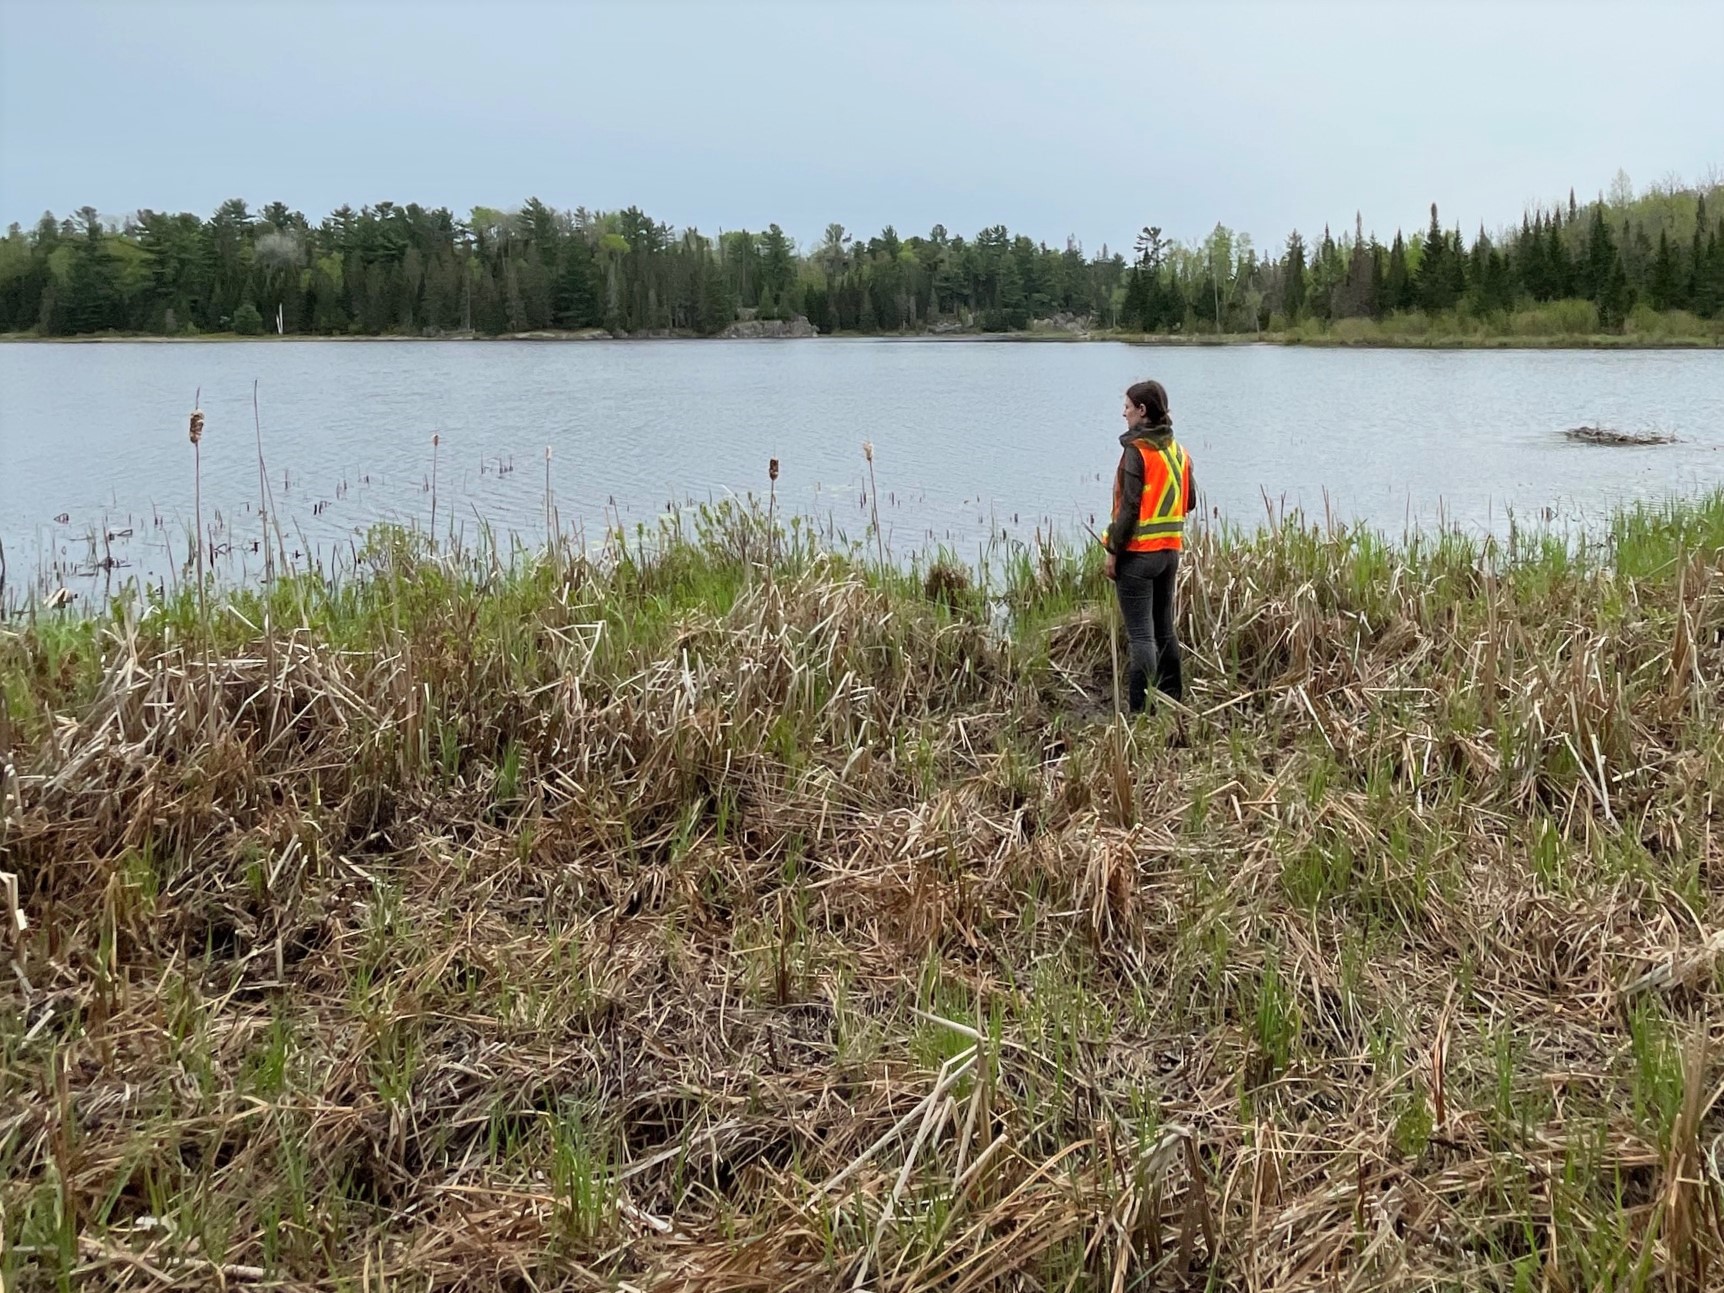 A woman in an orange vest stands in reeds at the edge of a pond in an Ontario wetland, in profile